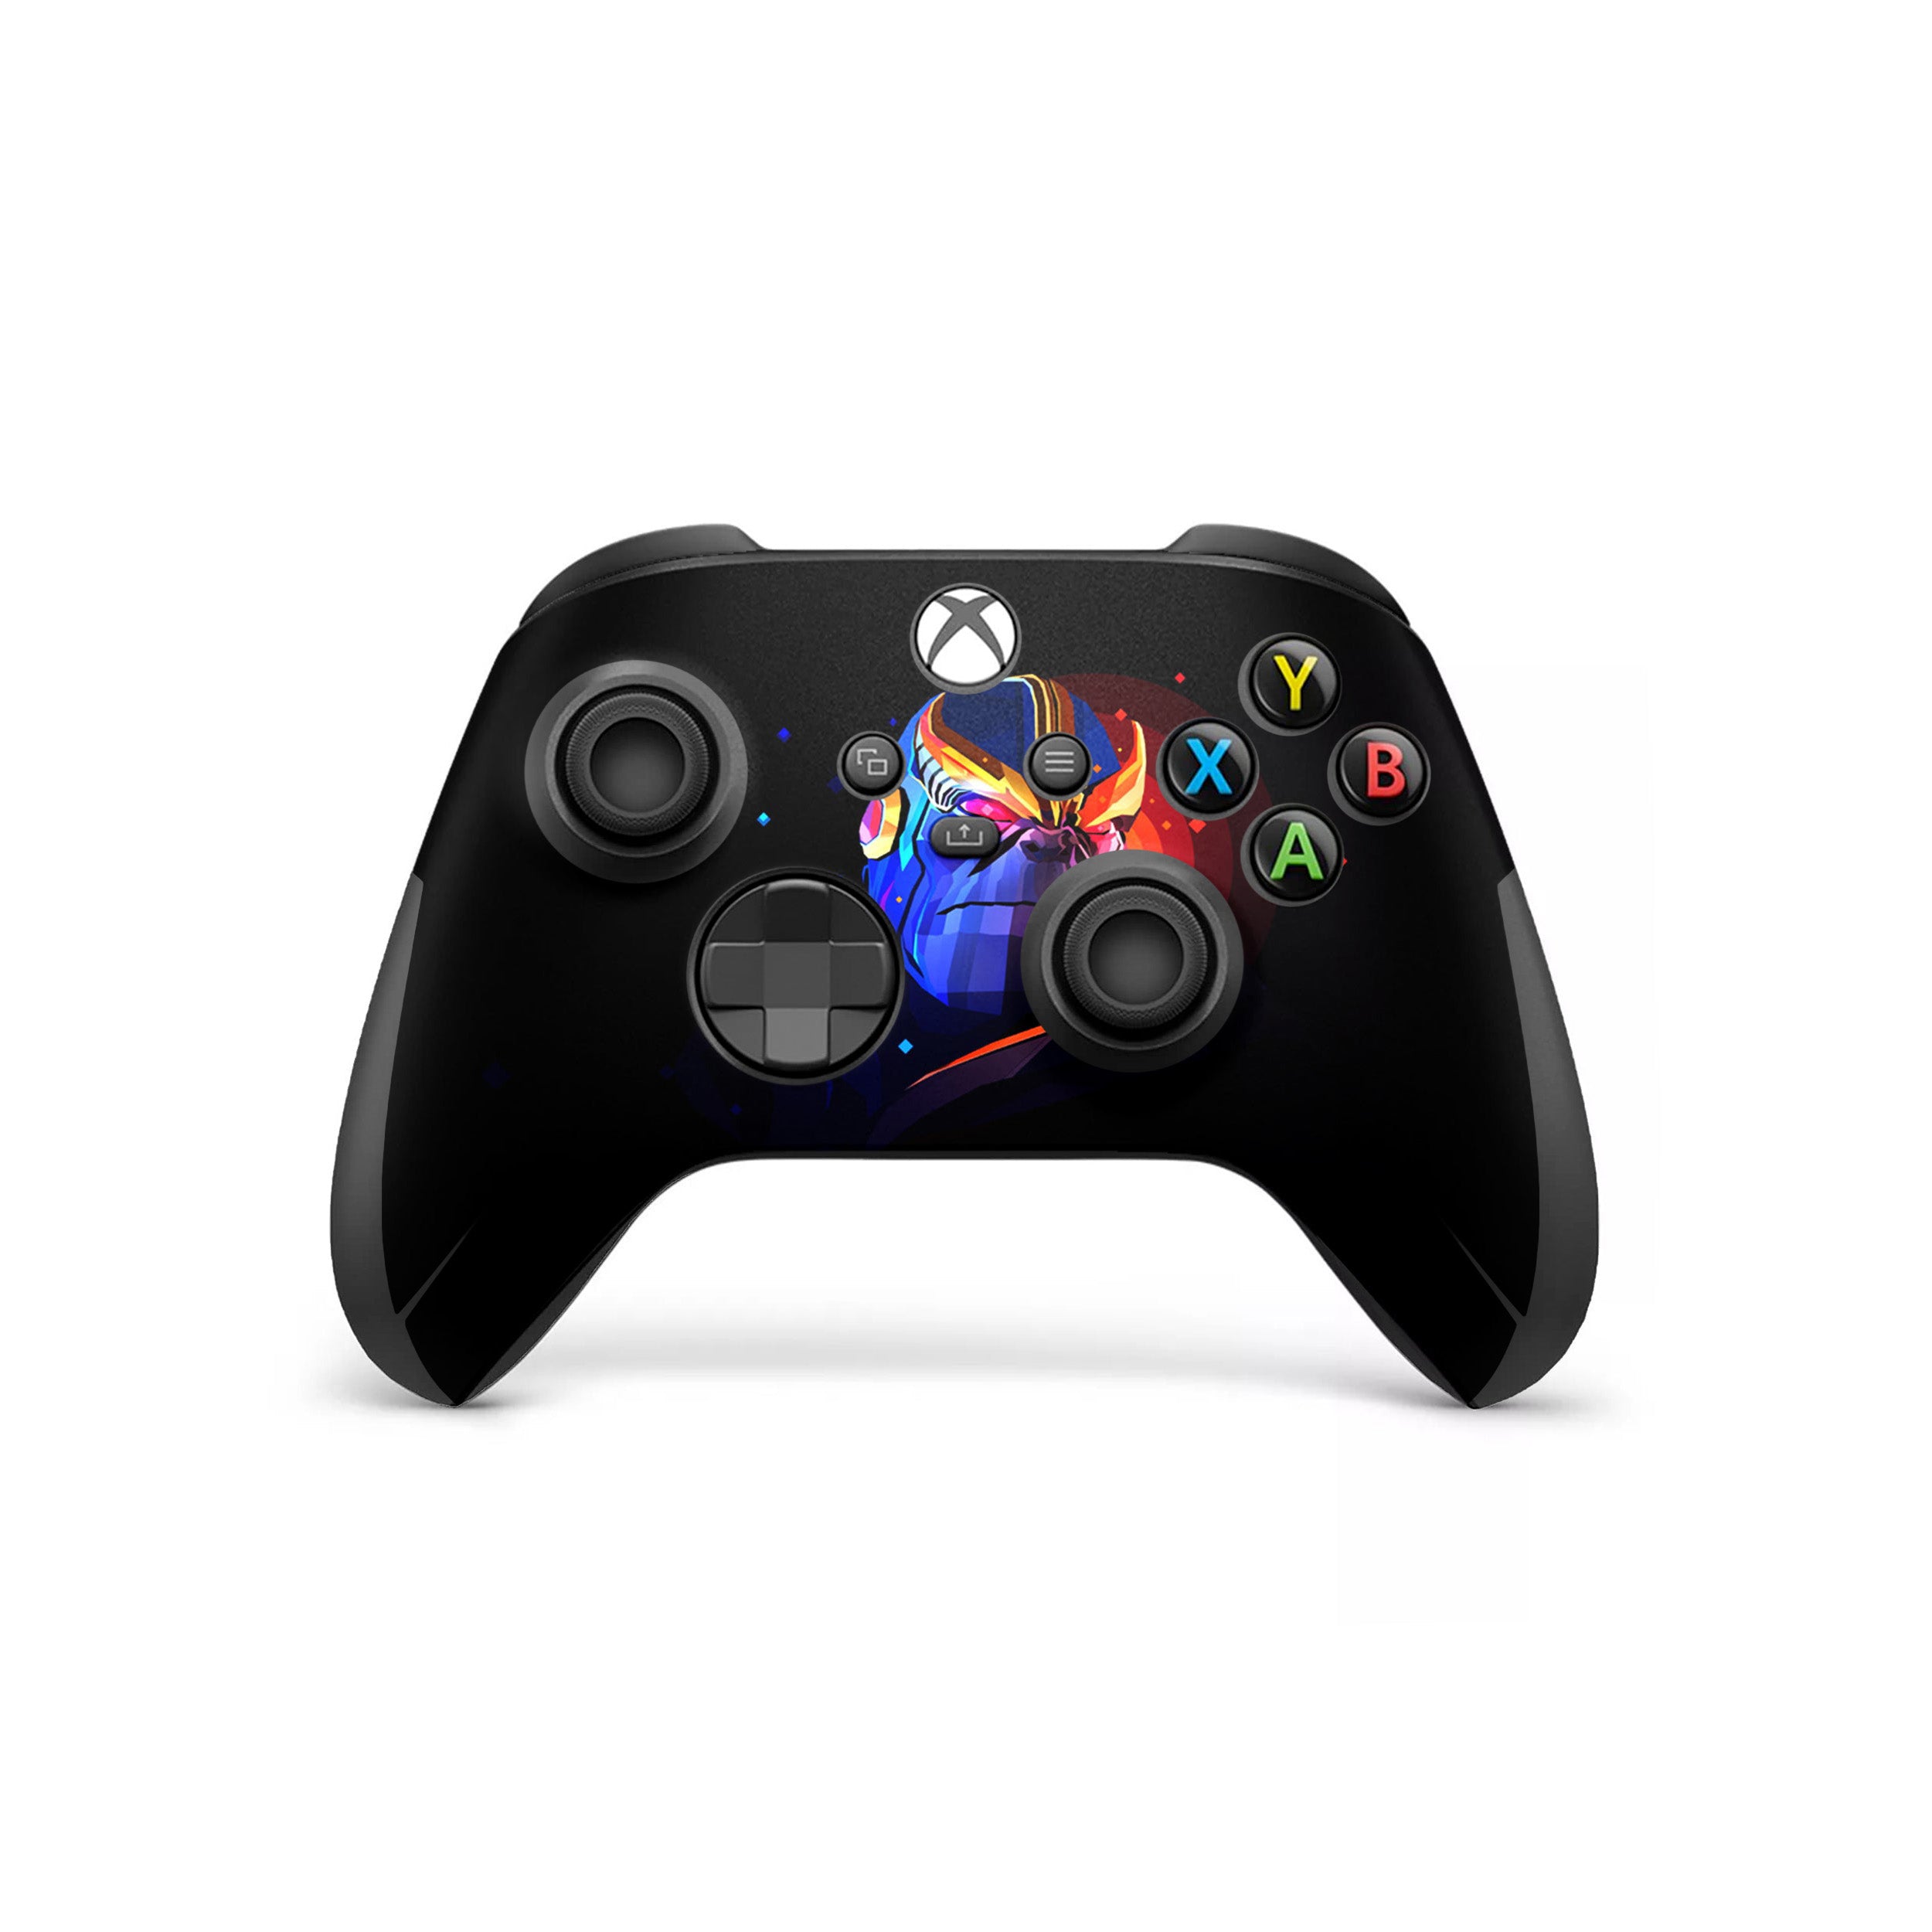 A video game skin featuring a Marvel Thanos design for the Xbox Wireless Controller.